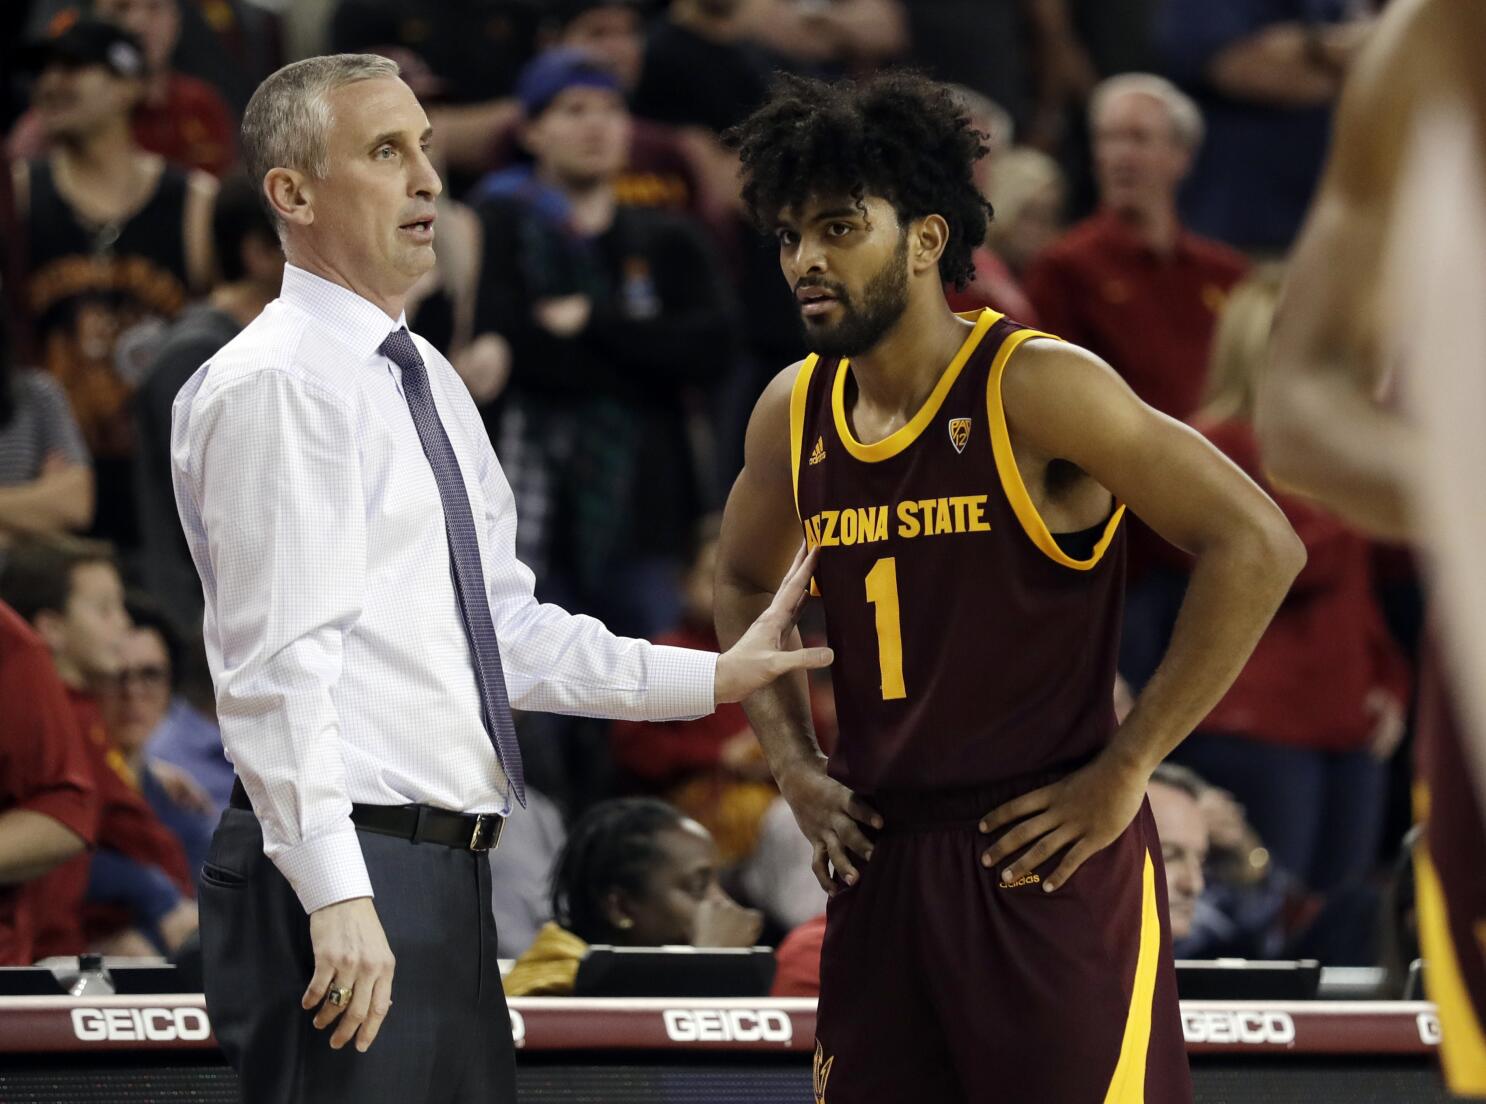 What to know about Bobby Hurley at ASU